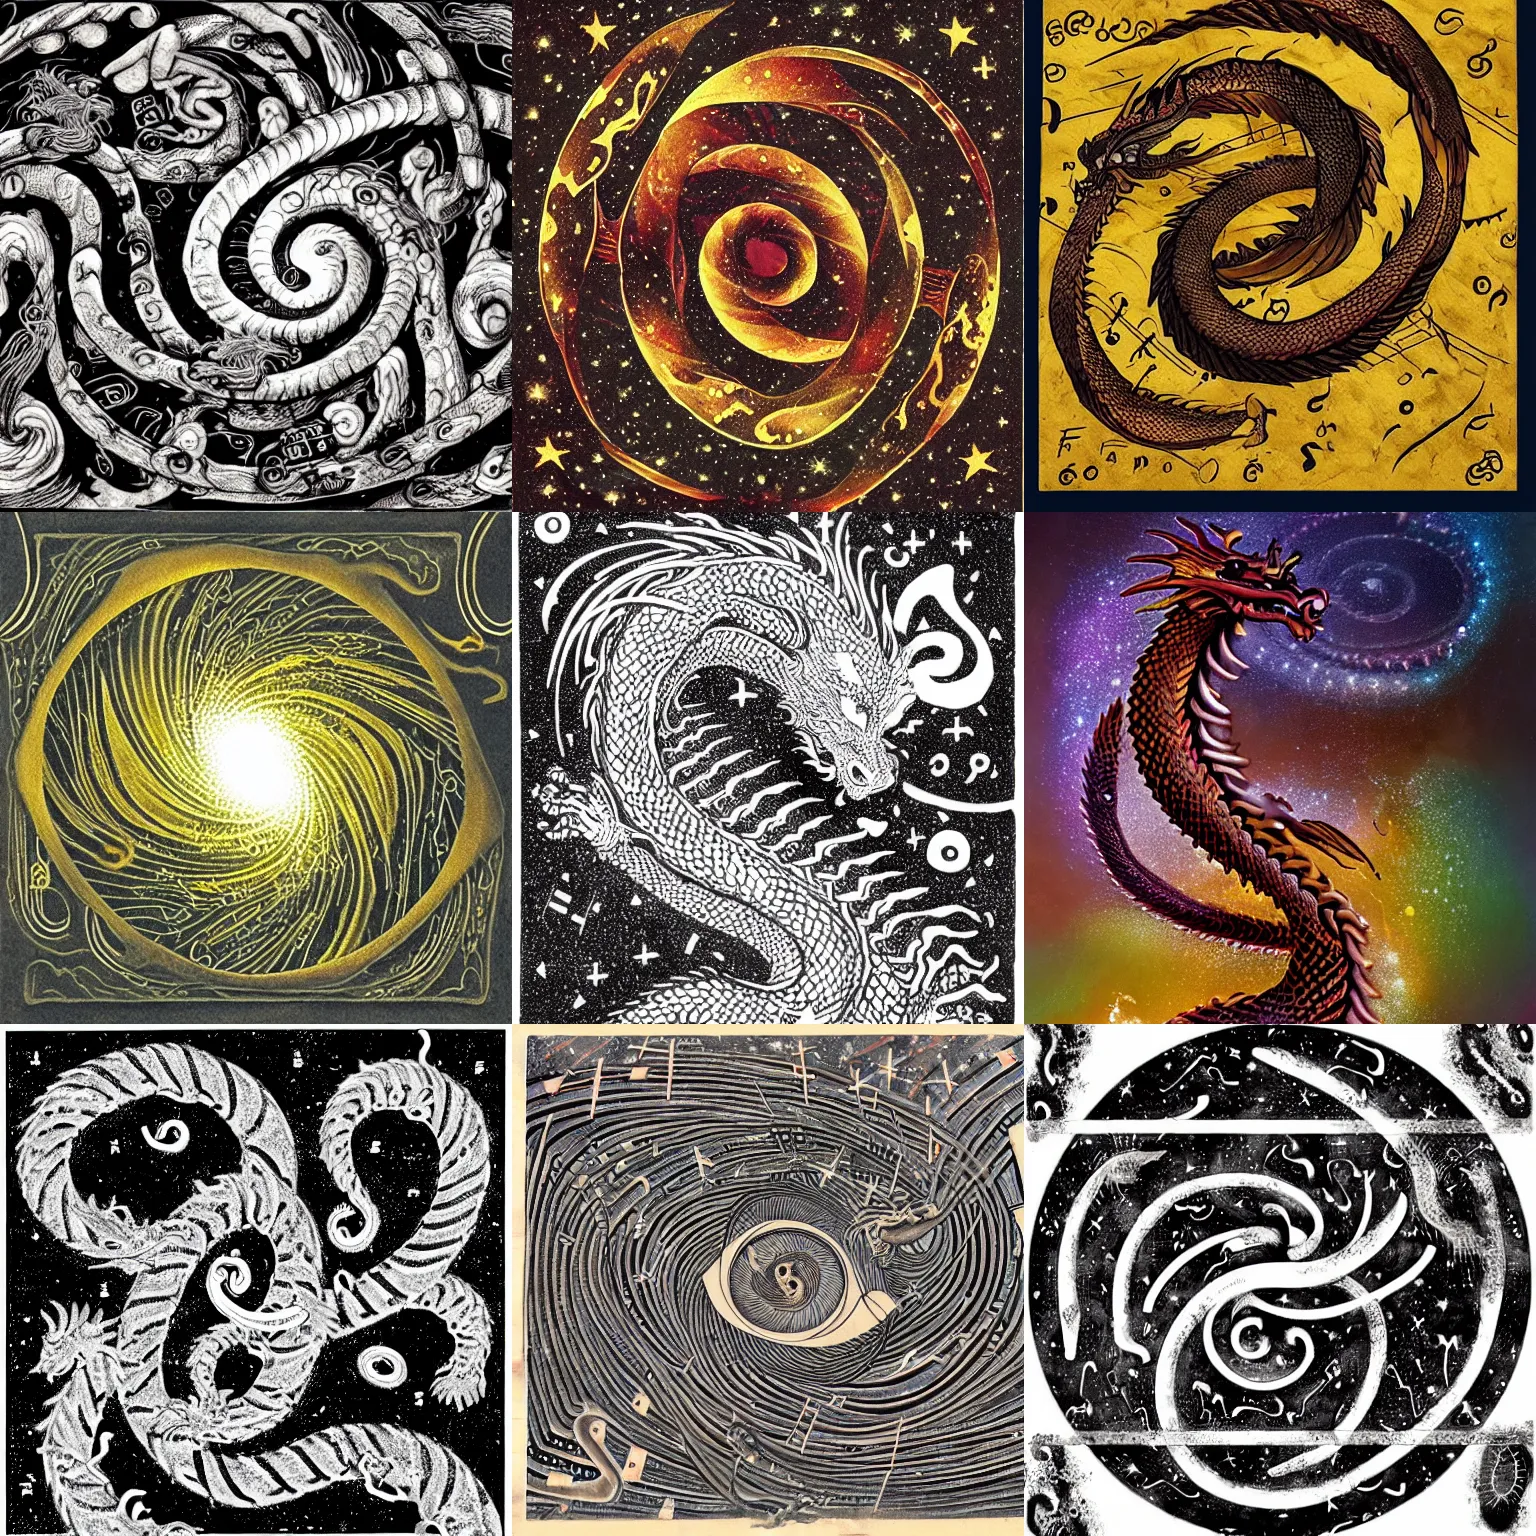 Prompt: dragon, spiral galaxy, made of Notation, Symbols, Lines, Sequences, Interpretation, Instructions, Communication, Visuality, Process, form, line, character, surface, space, material, immaterial, sensual, symbolic, conceptual, Series, Variations, Temporalization, Processualization, Notation, Instruction, Form, Sign, Symbol, Movement, Parallel, Sequential, Disordered, Unconnected, Static, Visual, Mental, Iconic, Imaginative. Creative, large-scale, multi-part, process, drawing, repetition, variation, order, chaos, improvisation, medium: black pencil